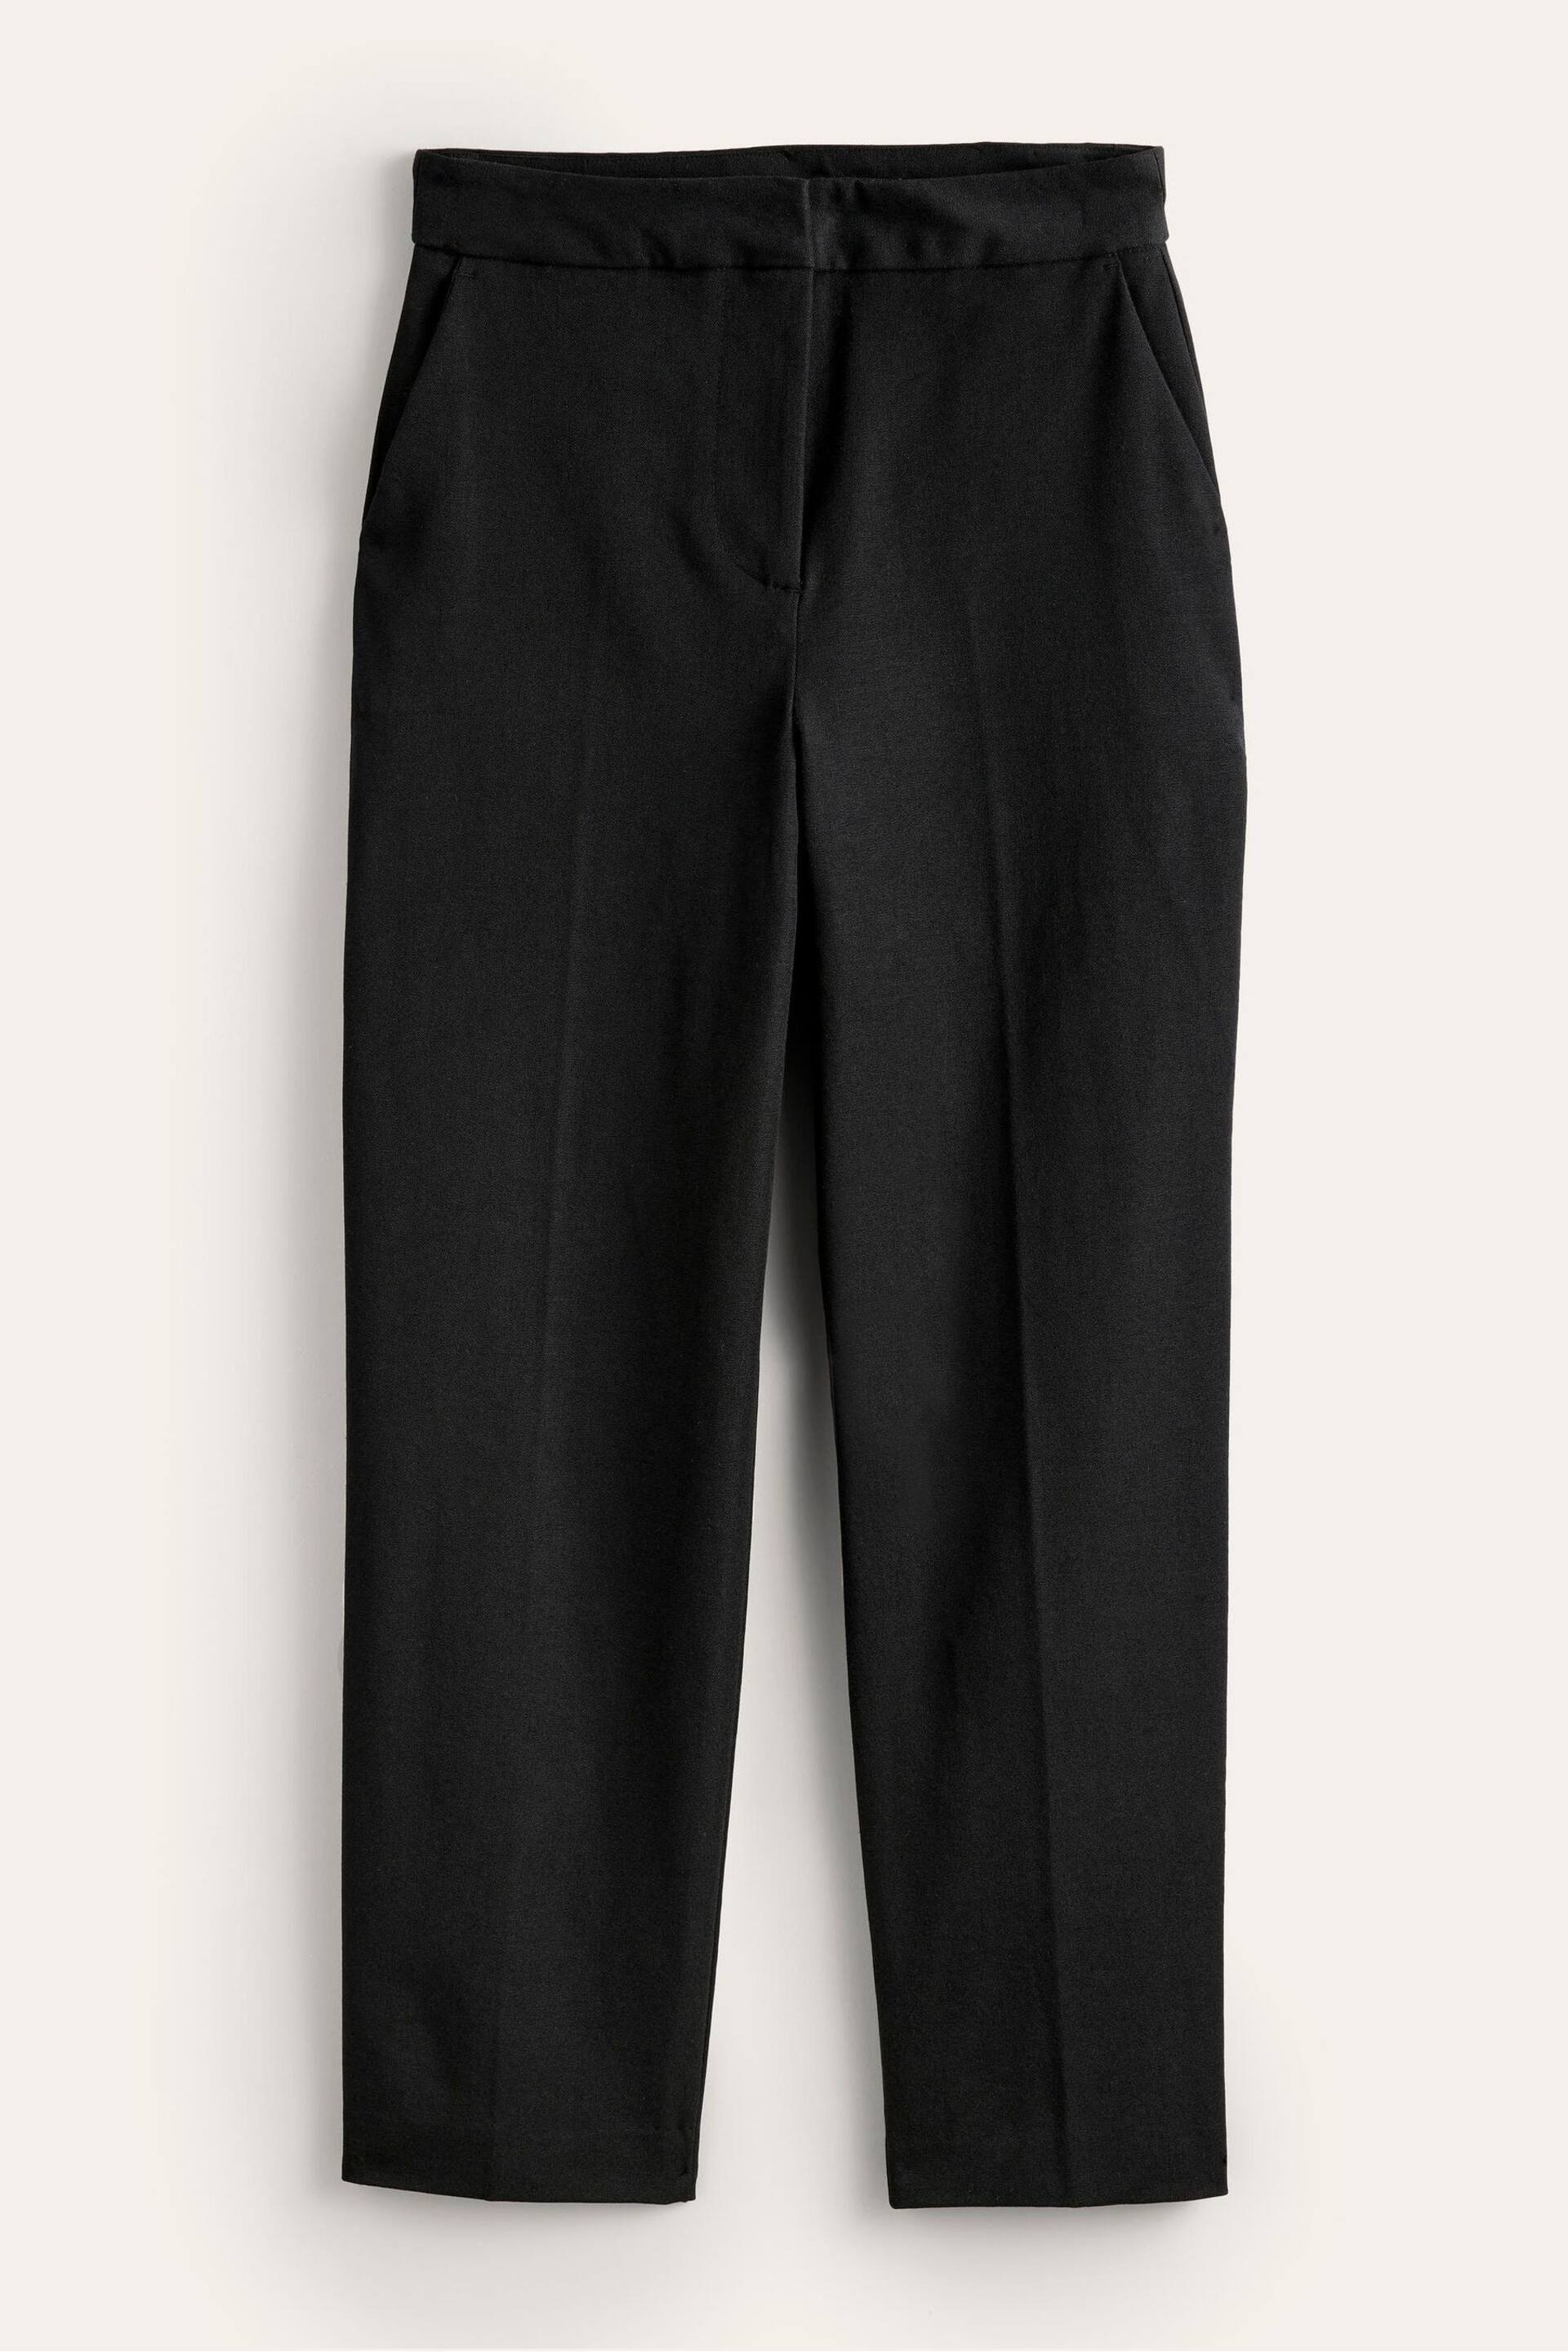 Boden Black Bi-Stretch Tapered Trousers - Image 6 of 6